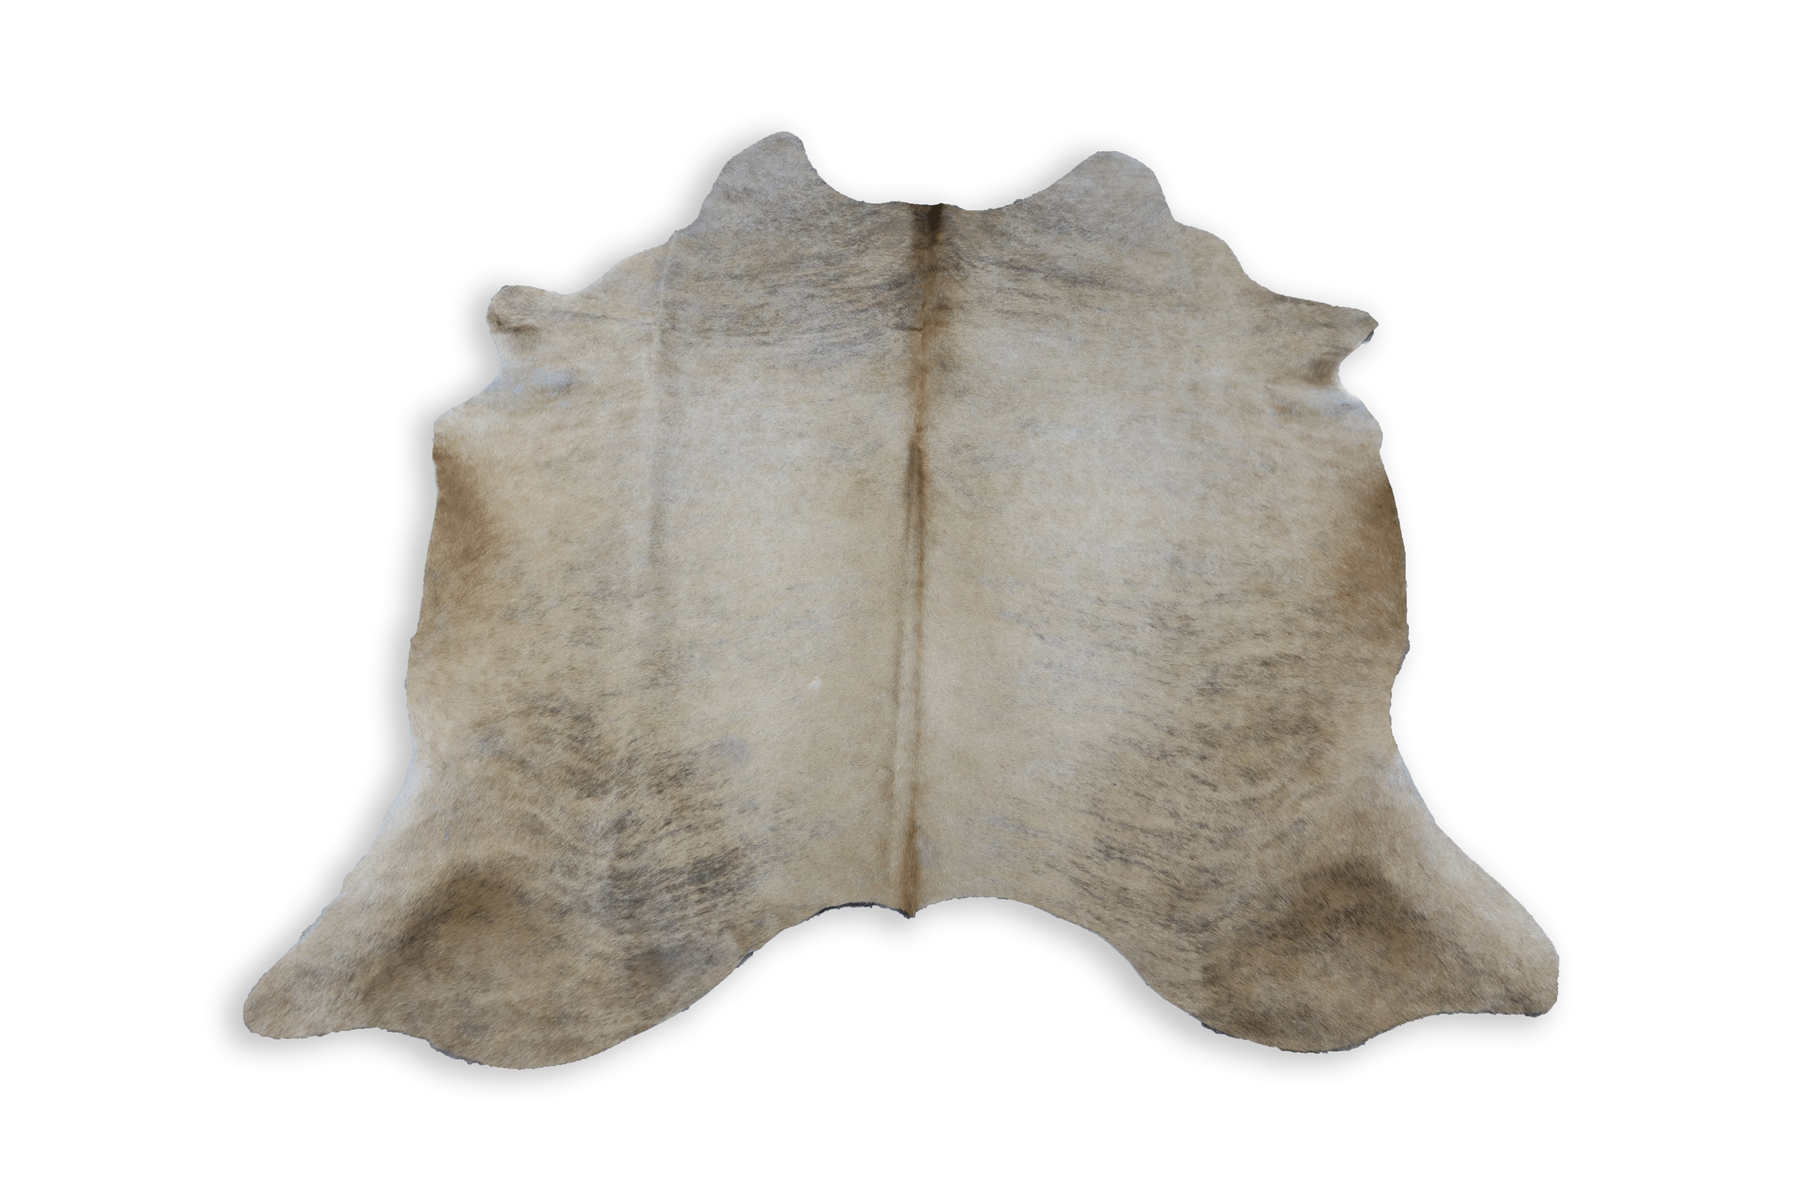 Tricolor (6.4 X 6 ft.) Exact As Photo BRAZILIAN Cowhide Rug | 100% Natural Cowhide Area Rug | Real Leather Cow Skin Rug | BZ333